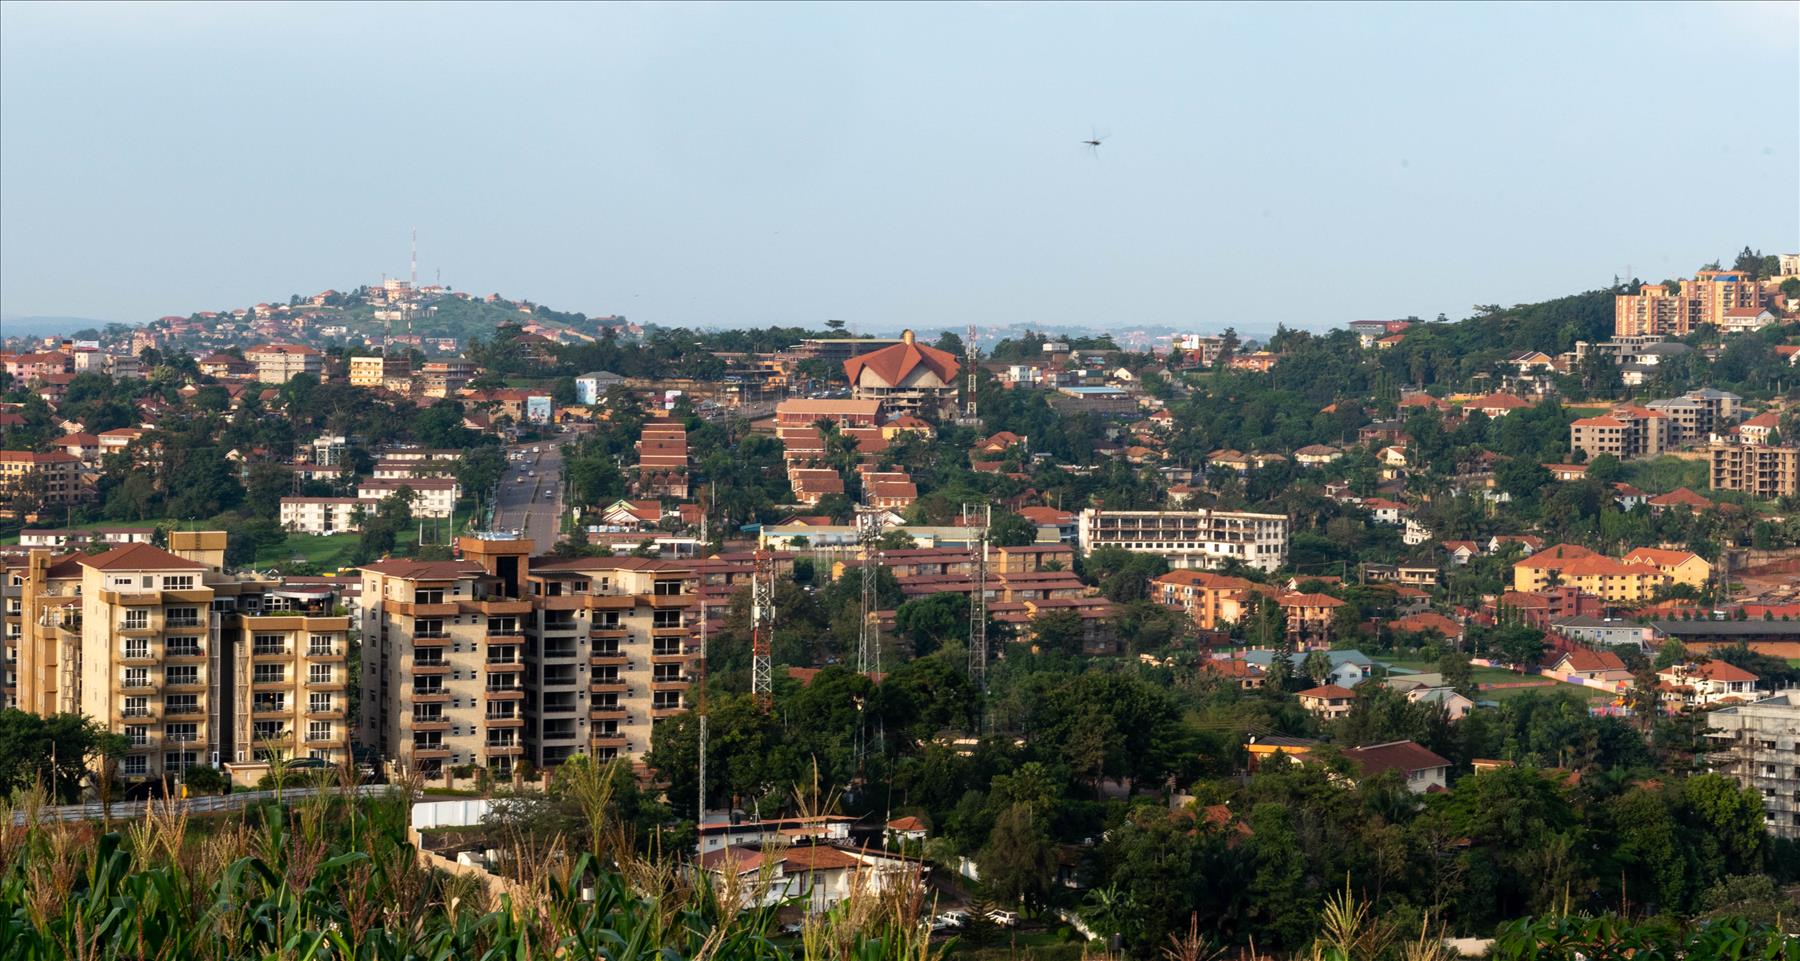 Inherited land wrangles in Uganda: a reality check